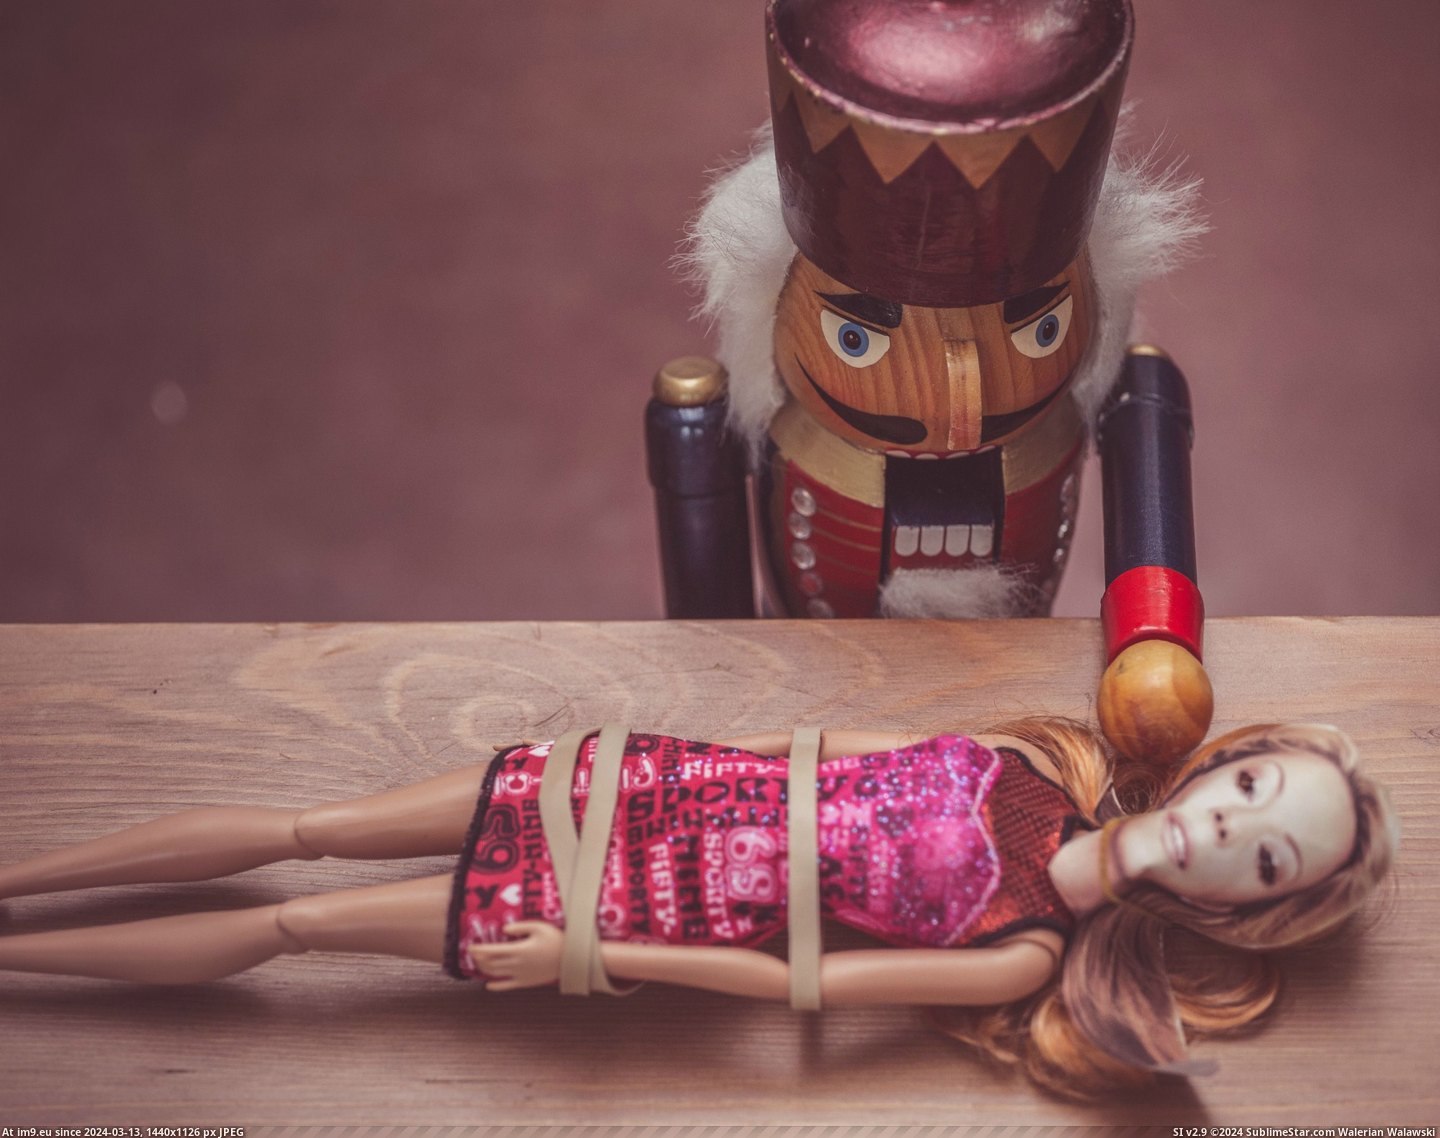 #For #Year #Friend #Stole #Nutcracker #Amazing #Christmas #Got [Pics] Last Christmas I stole my friend's nutcracker - this year, he got these back: 'most amazing thing anyone has done for me  Pic. (Изображение из альбом My r/PICS favs))